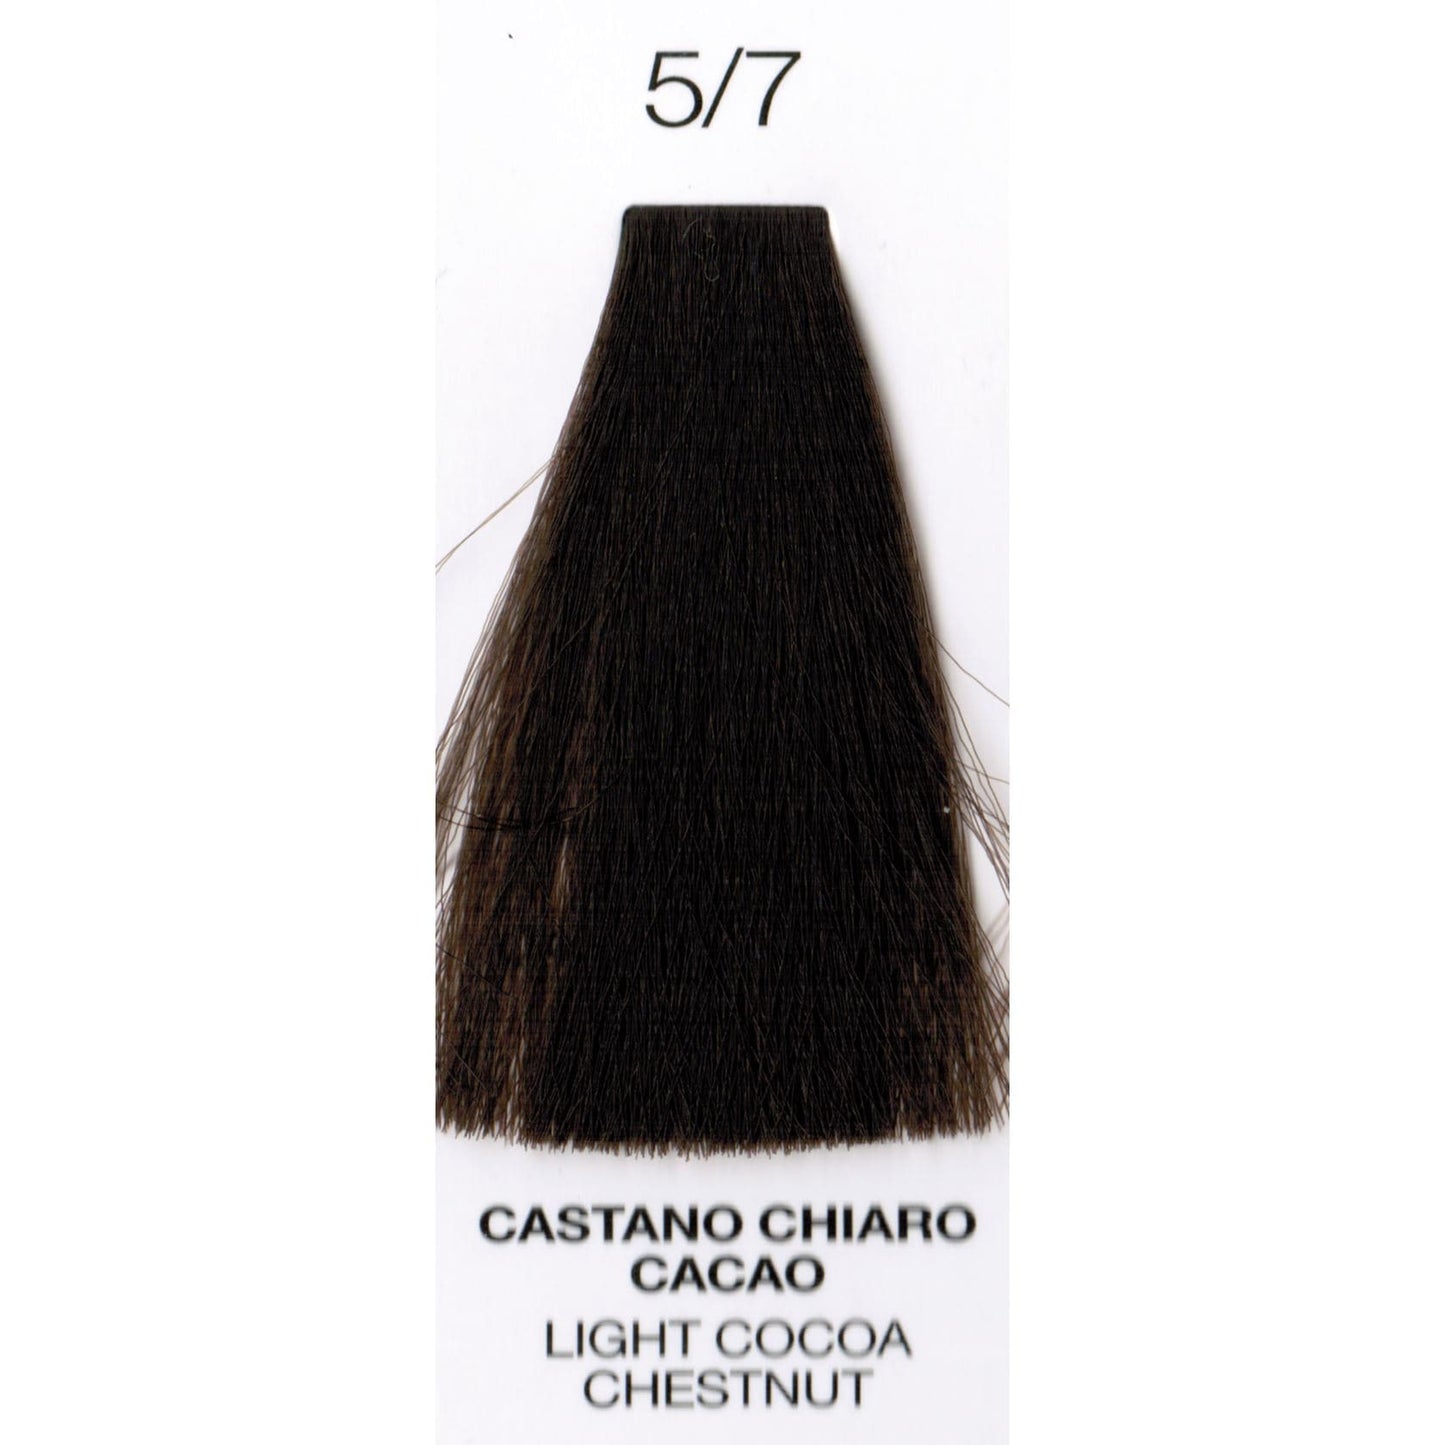 5/7 Light Cocoa Chestnut | Purity | Ammonia-Free Permanent Hair Color HAIR COLOR OYSTER 